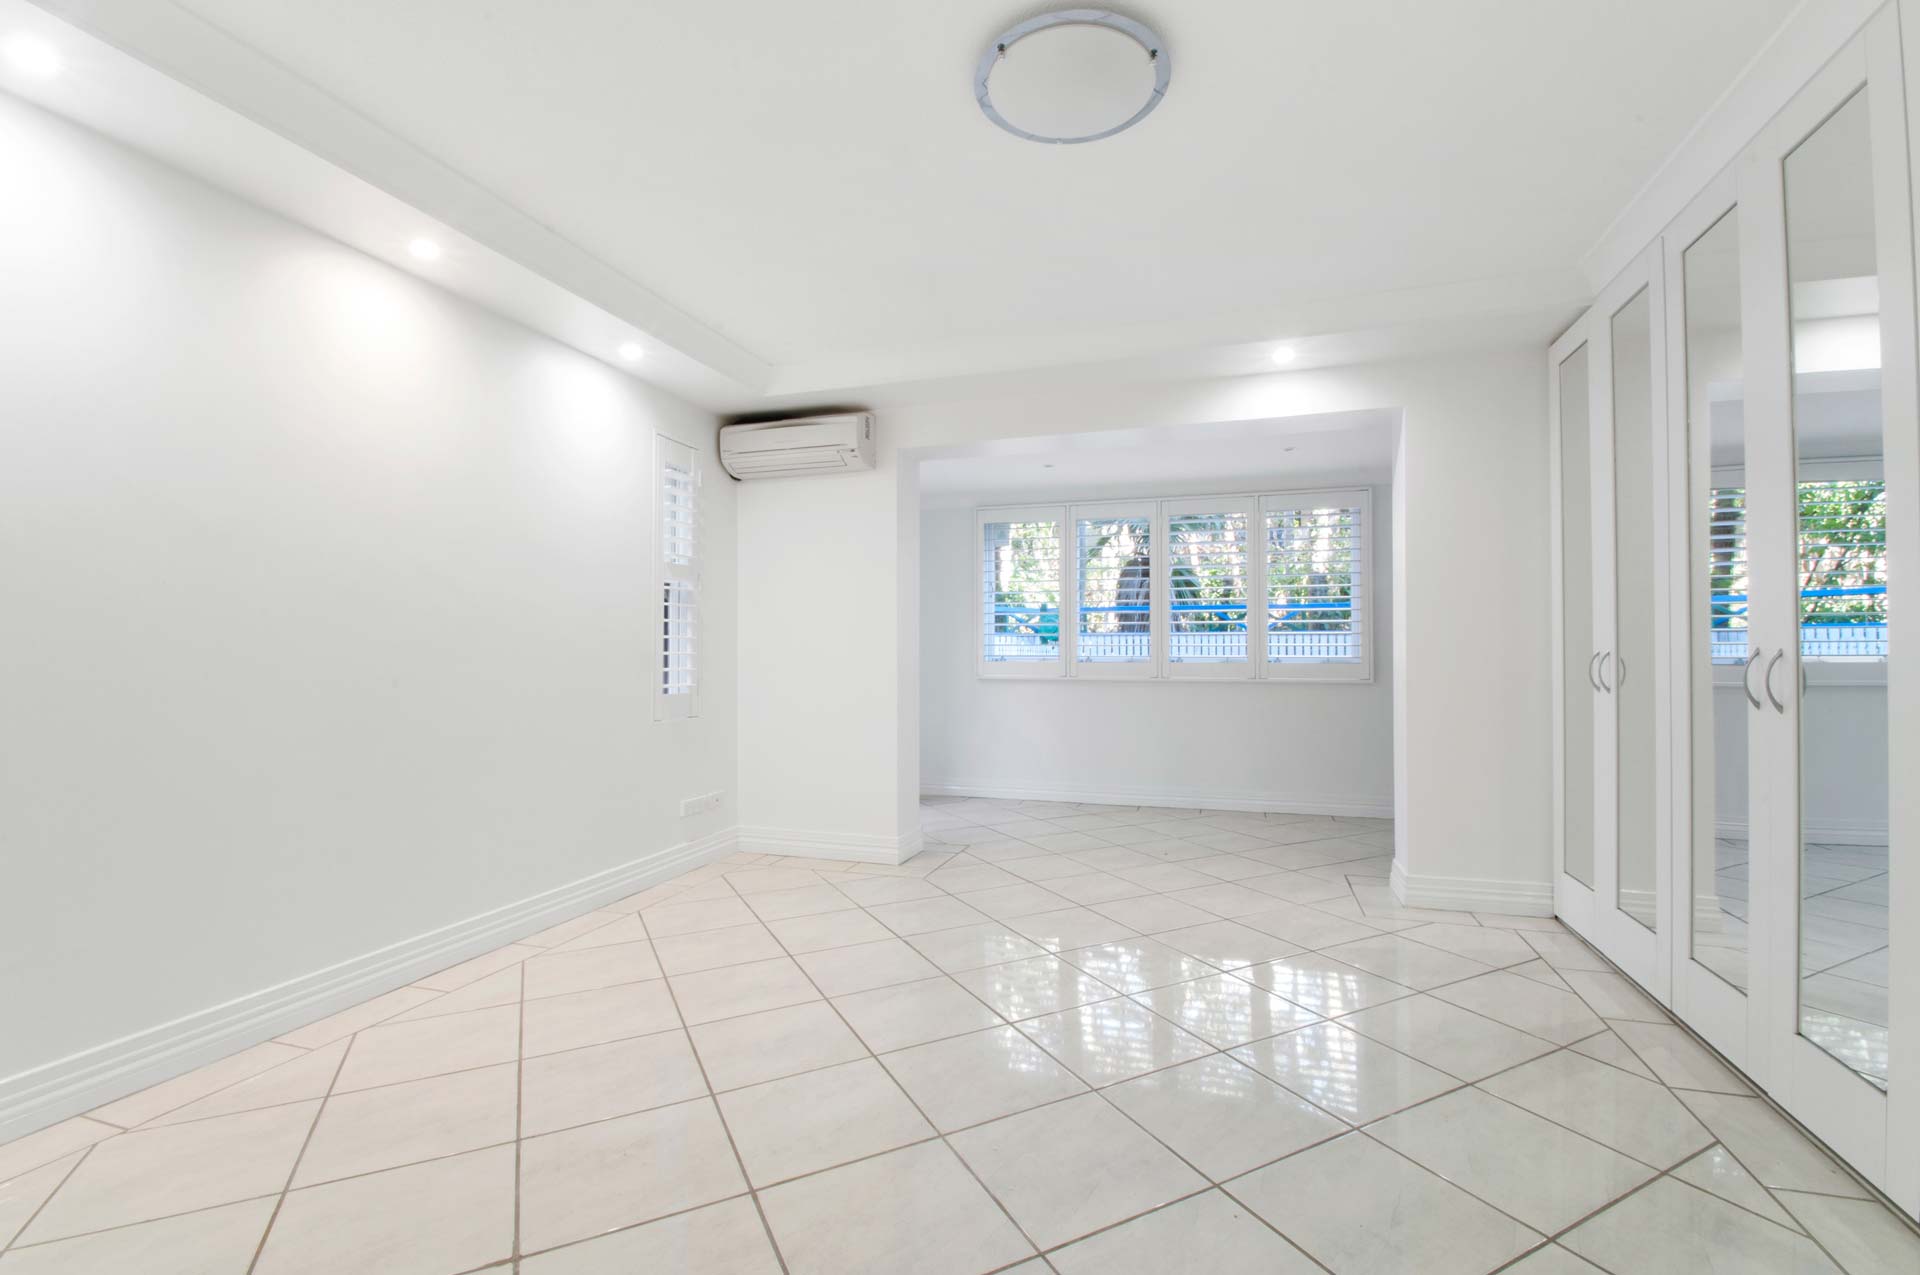 Newly constructed home with shiny tile floors